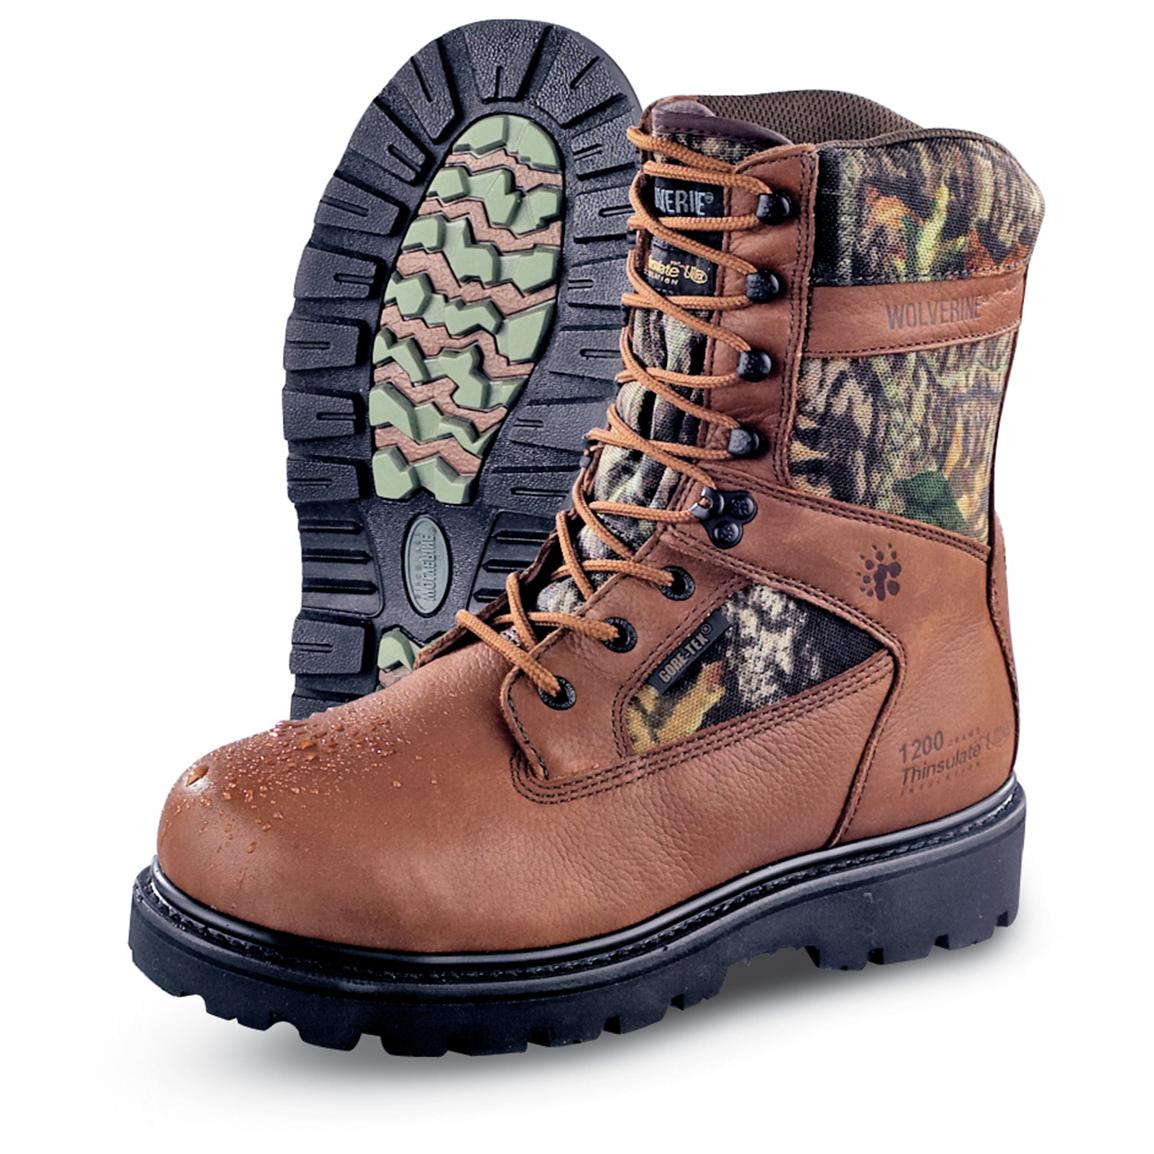 1200g thinsulate hunting boots,Save up to 16%,www.ilcascinone.com